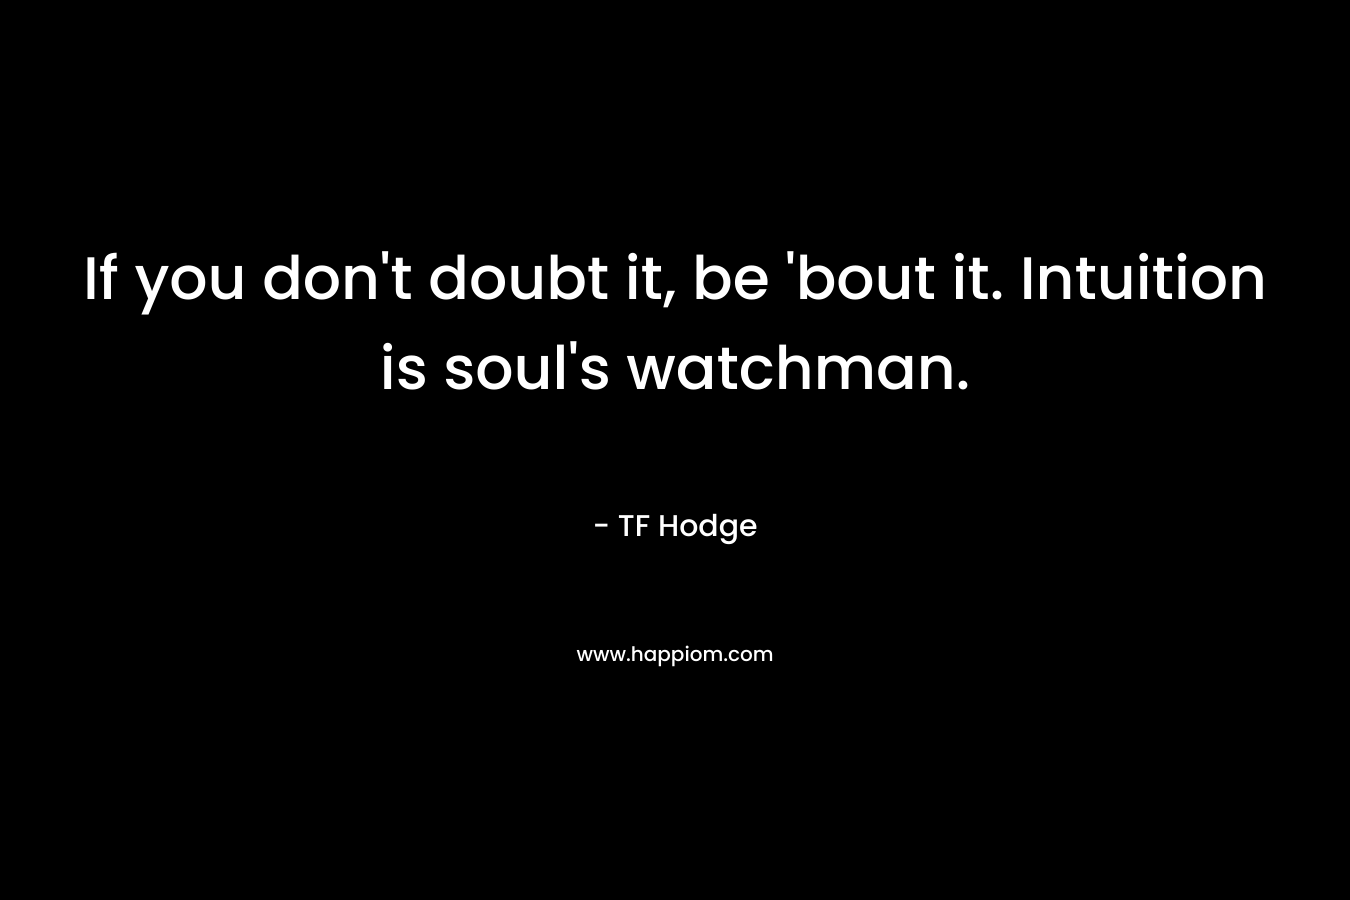 If you don’t doubt it, be ’bout it. Intuition is soul’s watchman. – TF Hodge